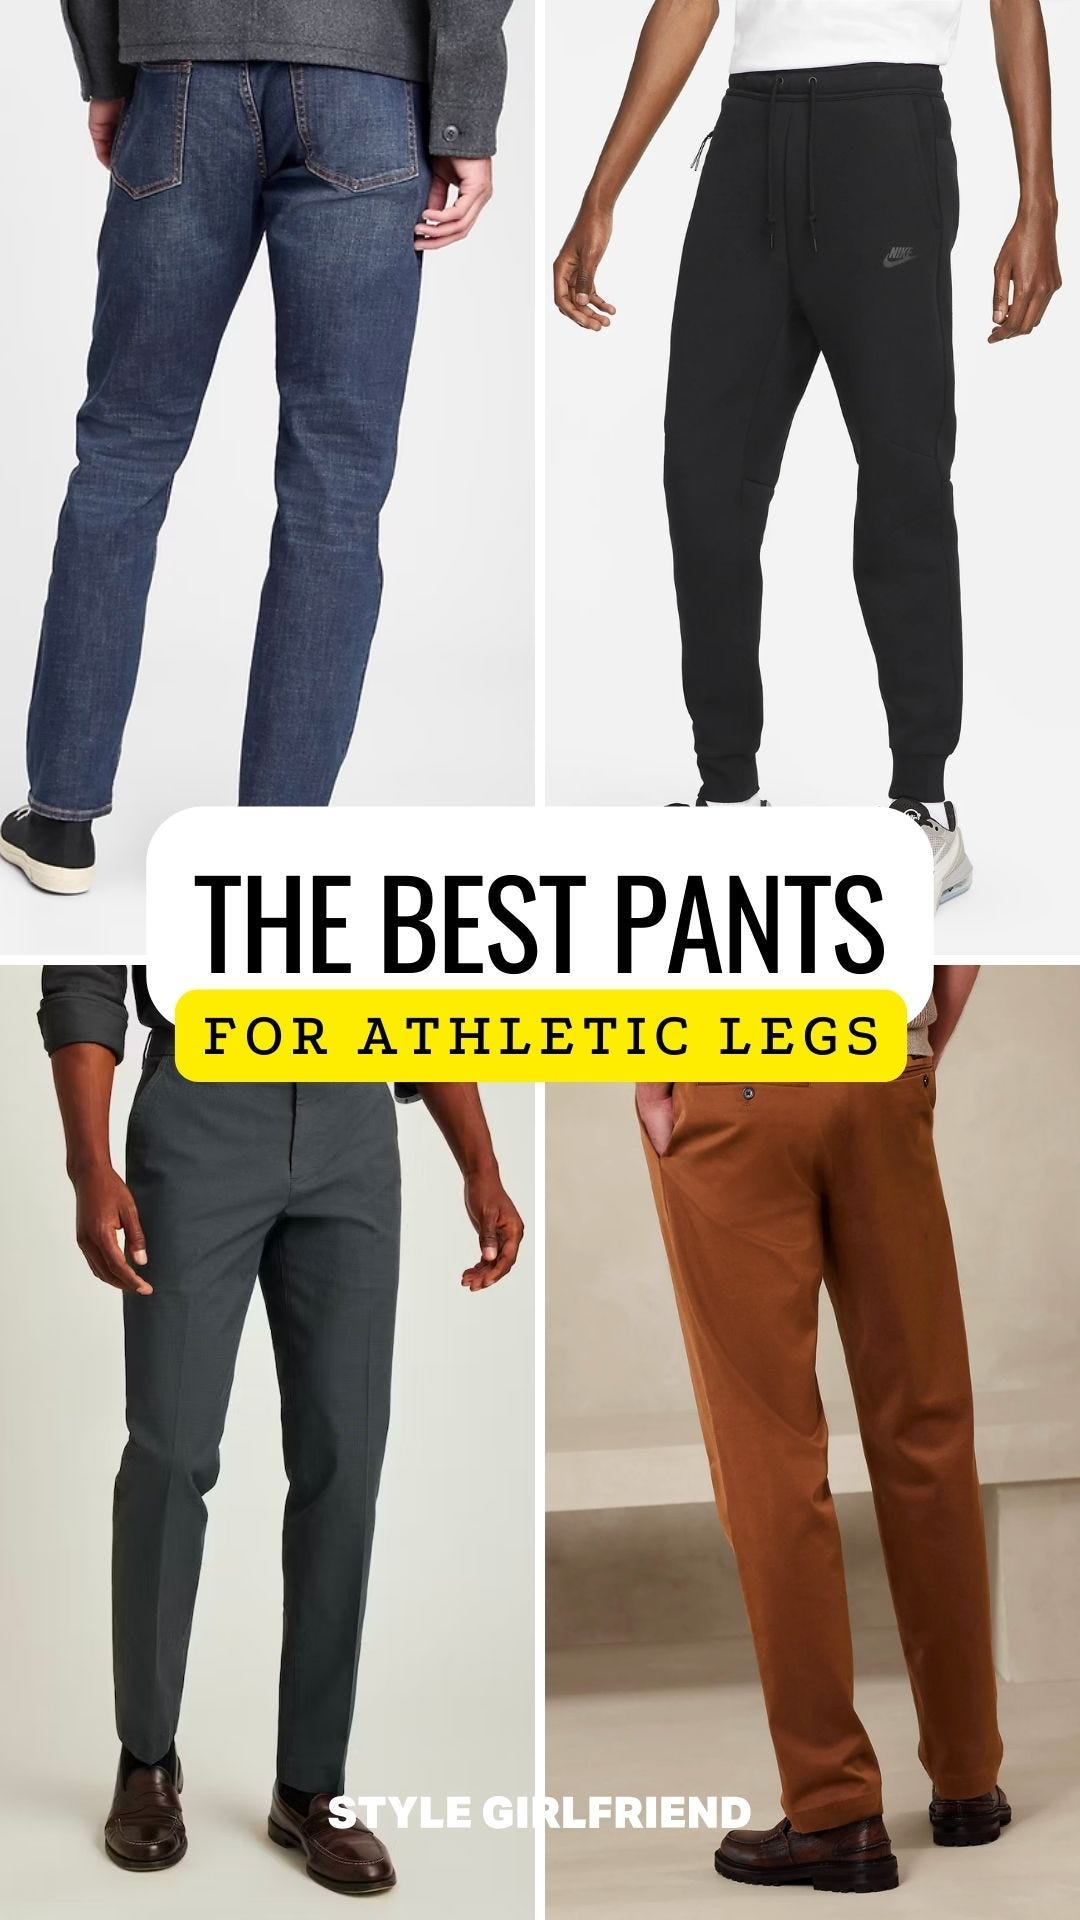 The Best Pants for Athletic Legs